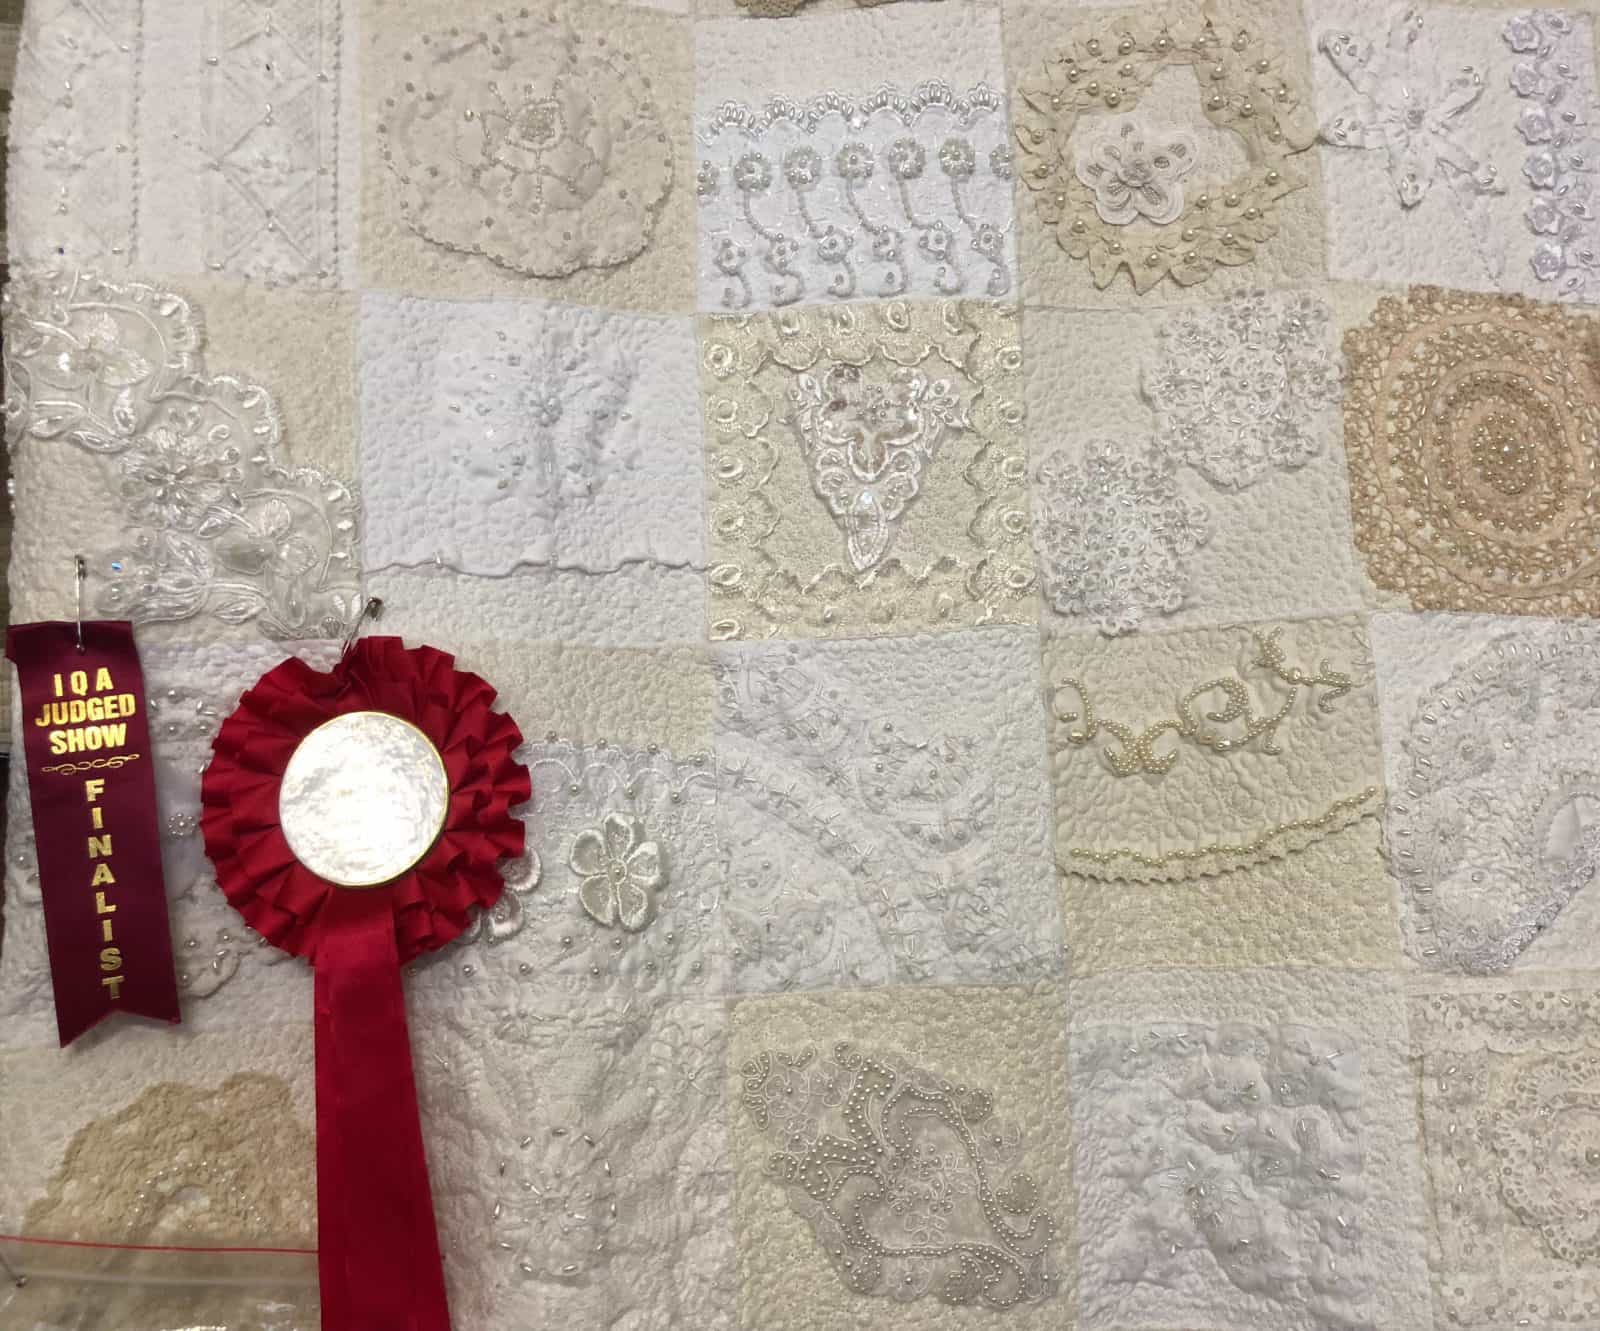 Heirloom Quilt - a queen size quilt constructed using vintage laces and doilies.